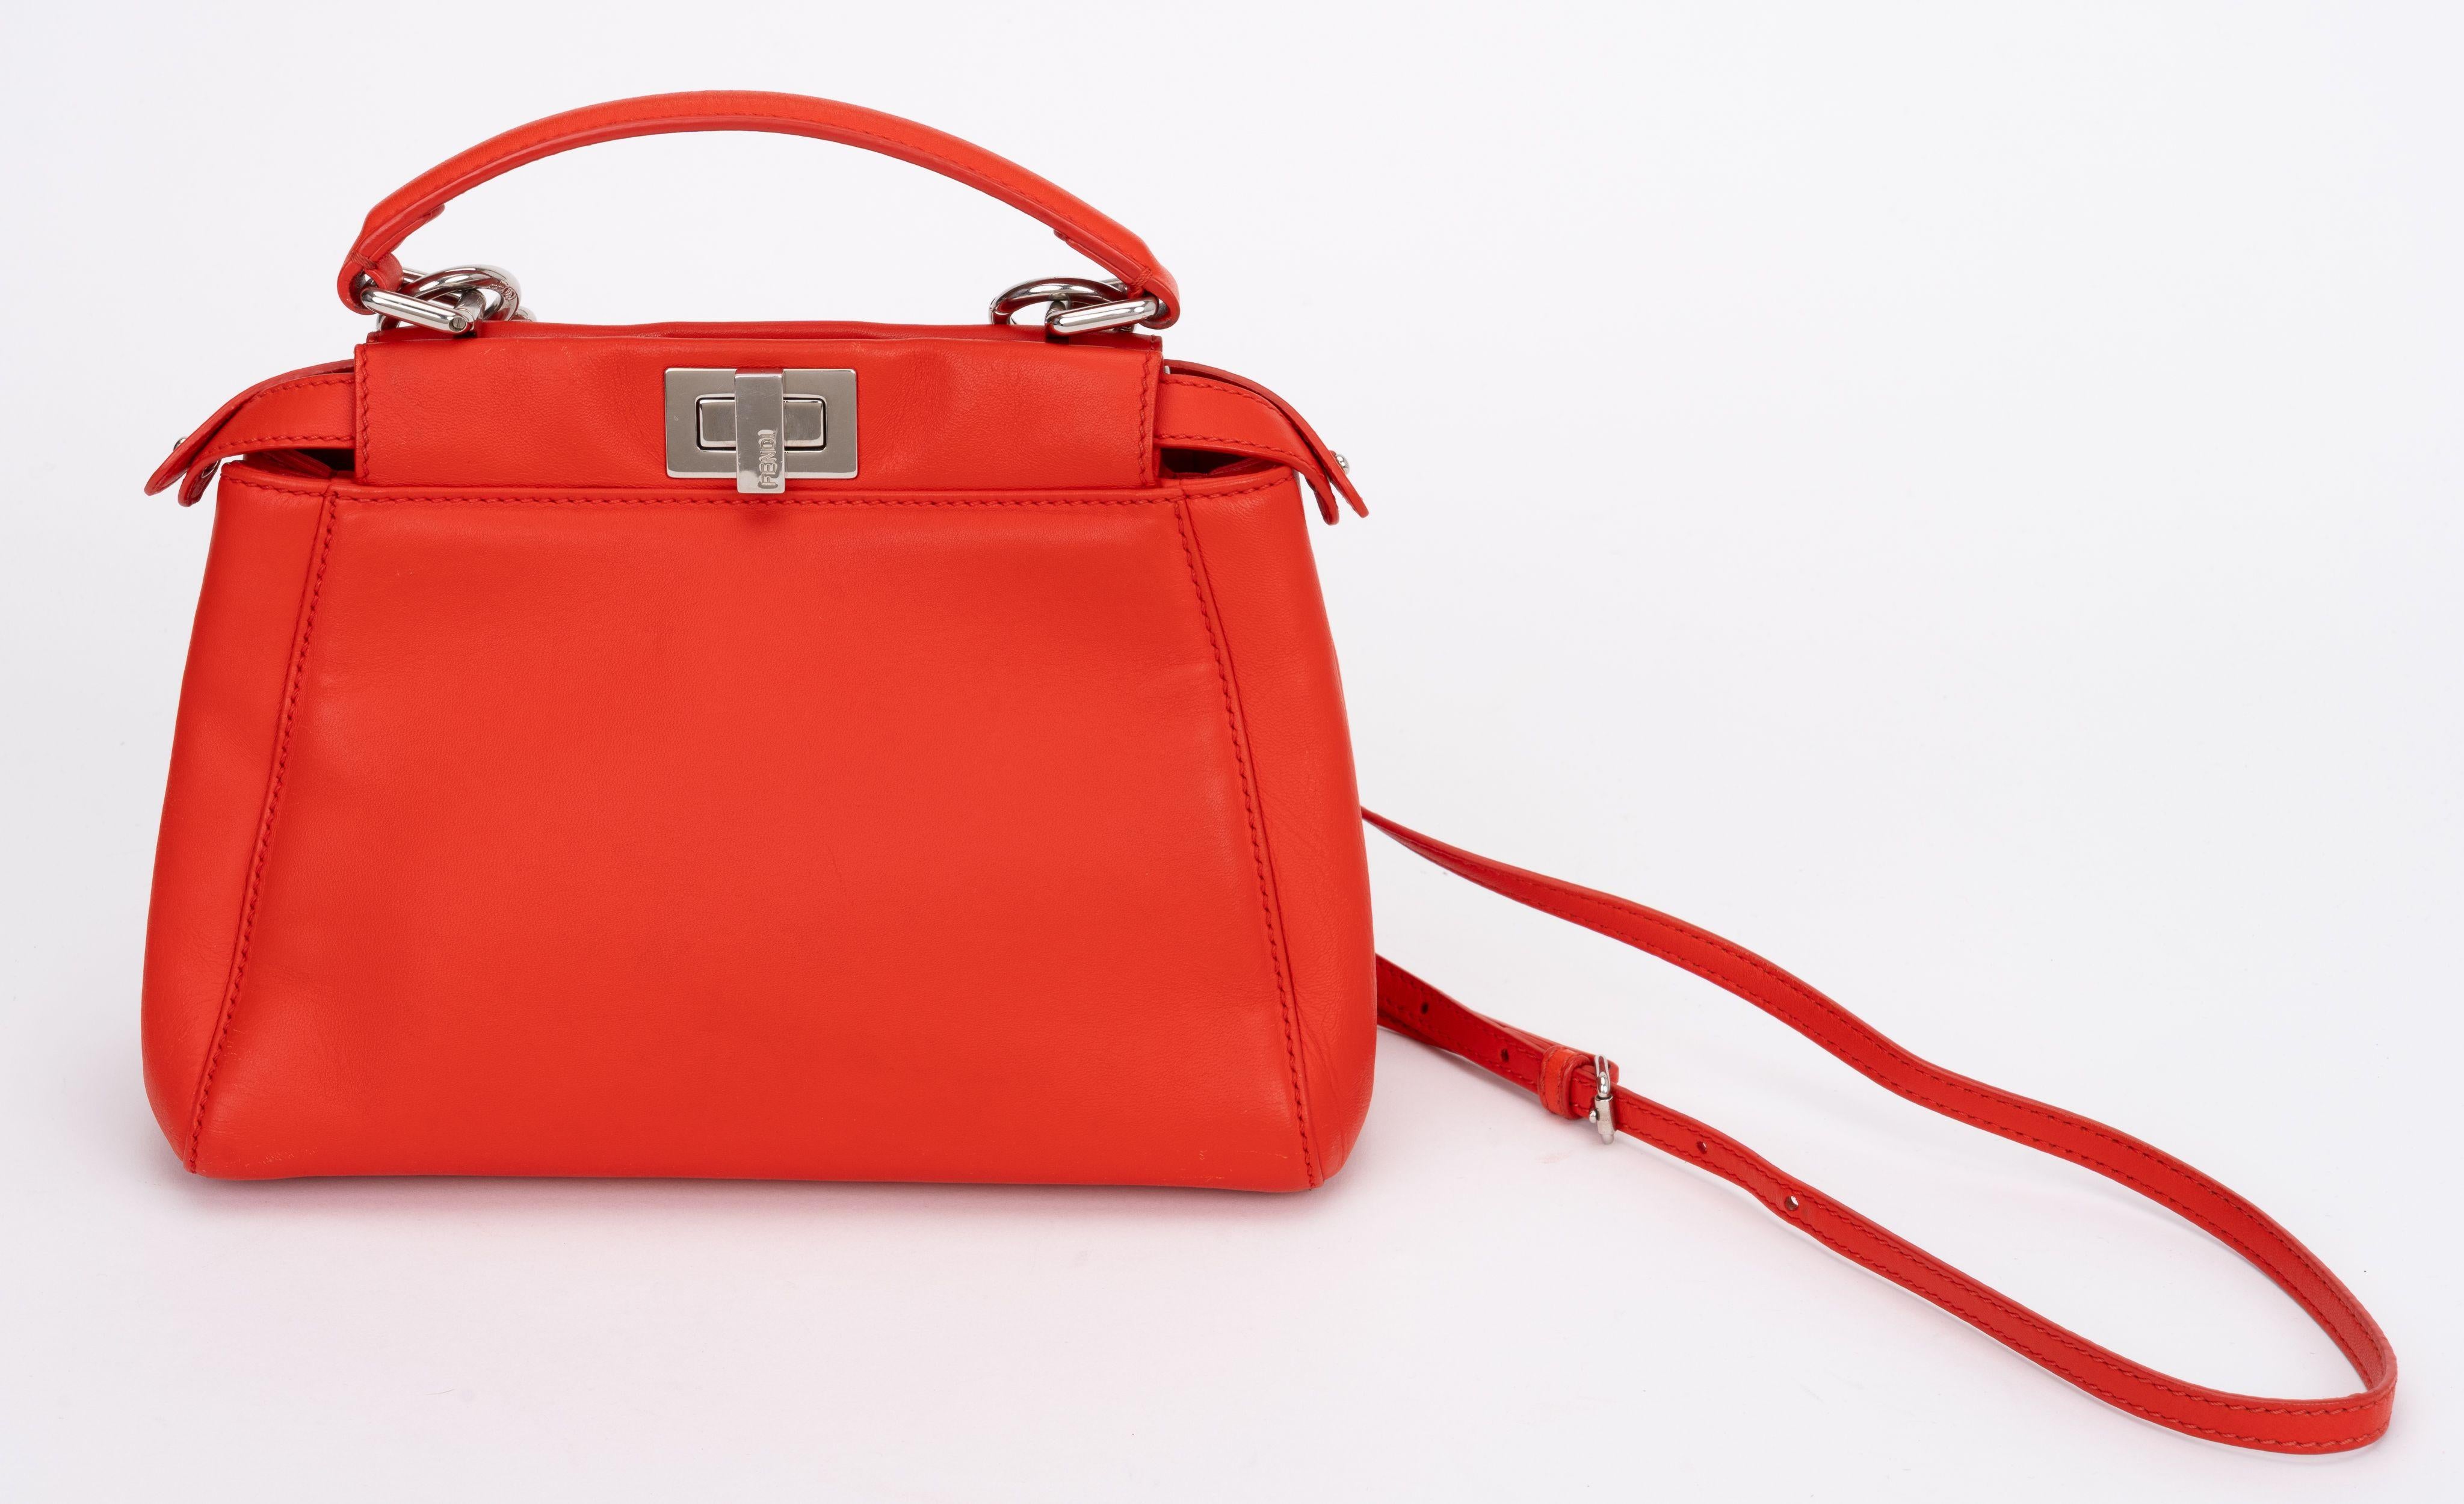 Fendi Coral Mini Peekaboo Cross Body In Excellent Condition For Sale In West Hollywood, CA